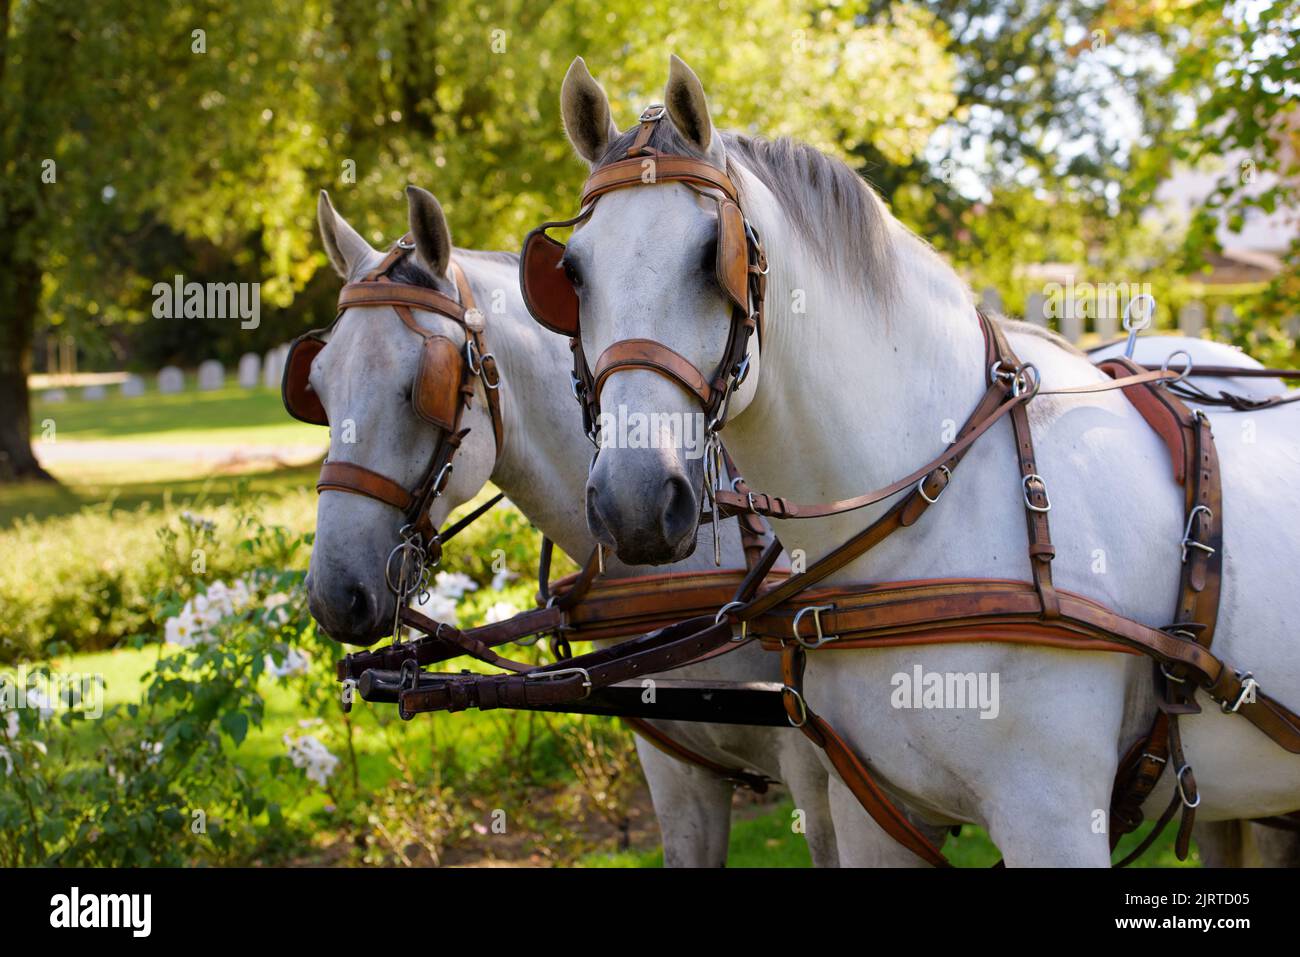 closeup of two white horses at a carriage against a green park in the background Stock Photo